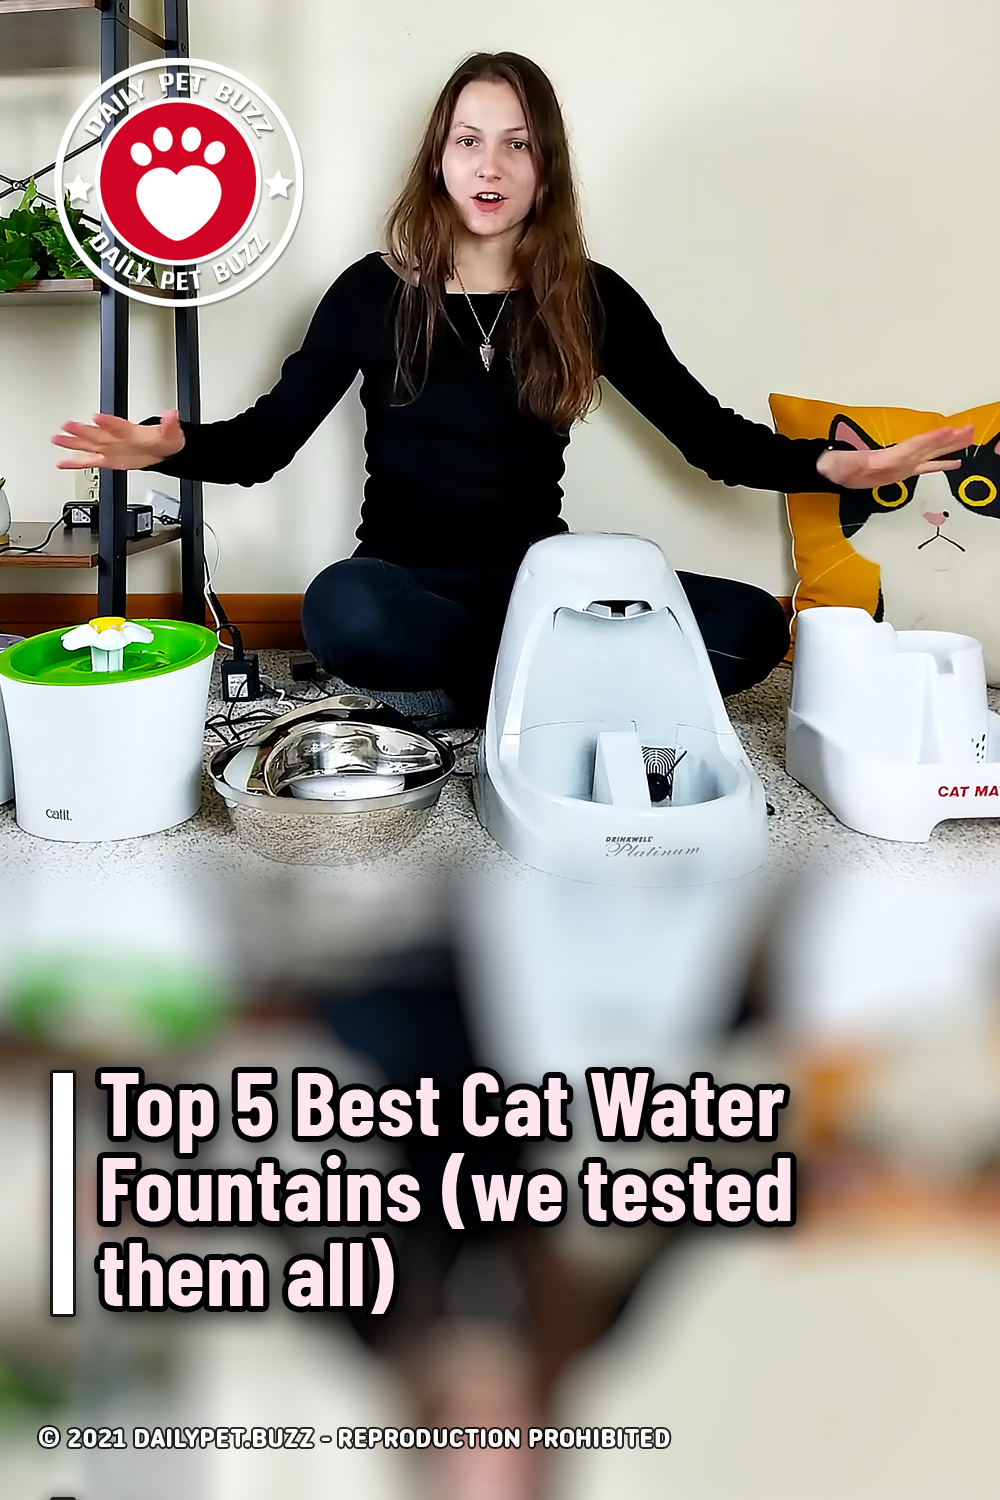 Top 5 Best Cat Water Fountains (we tested them all)